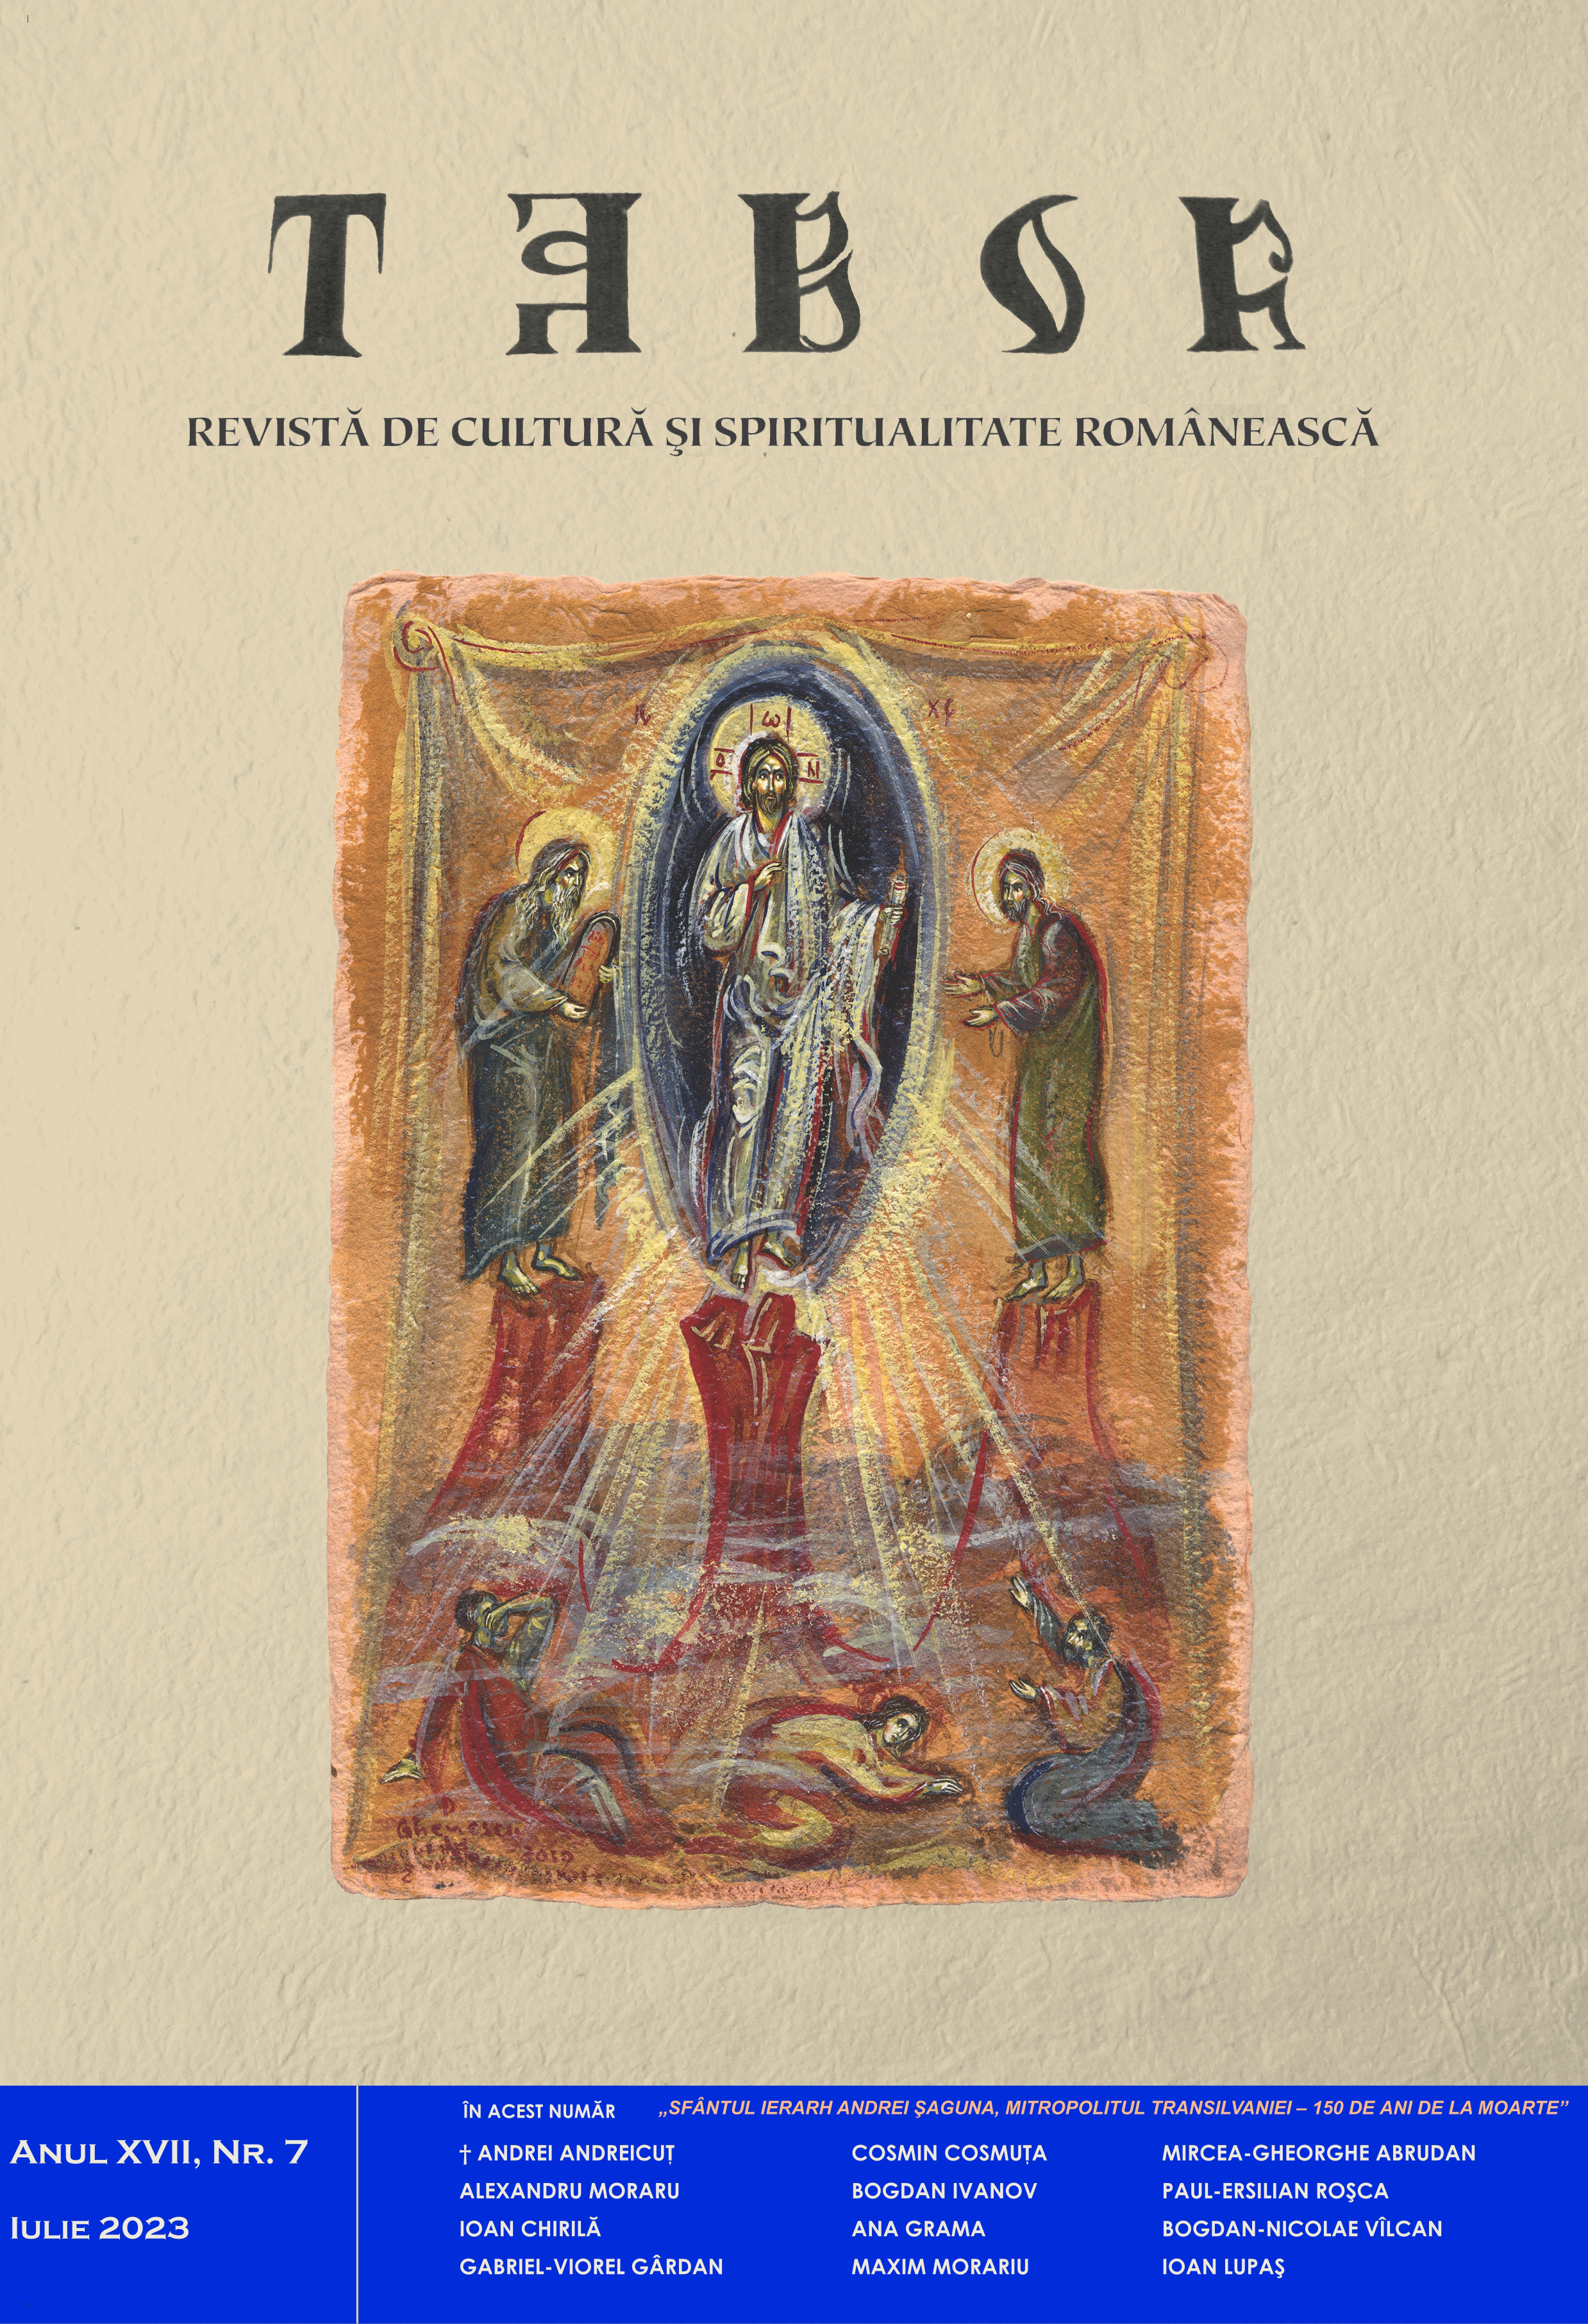 Accents of inter-confessional polemics from the absolutist period (1850-1860) in the letters of Saint Andrei Şaguna Cover Image